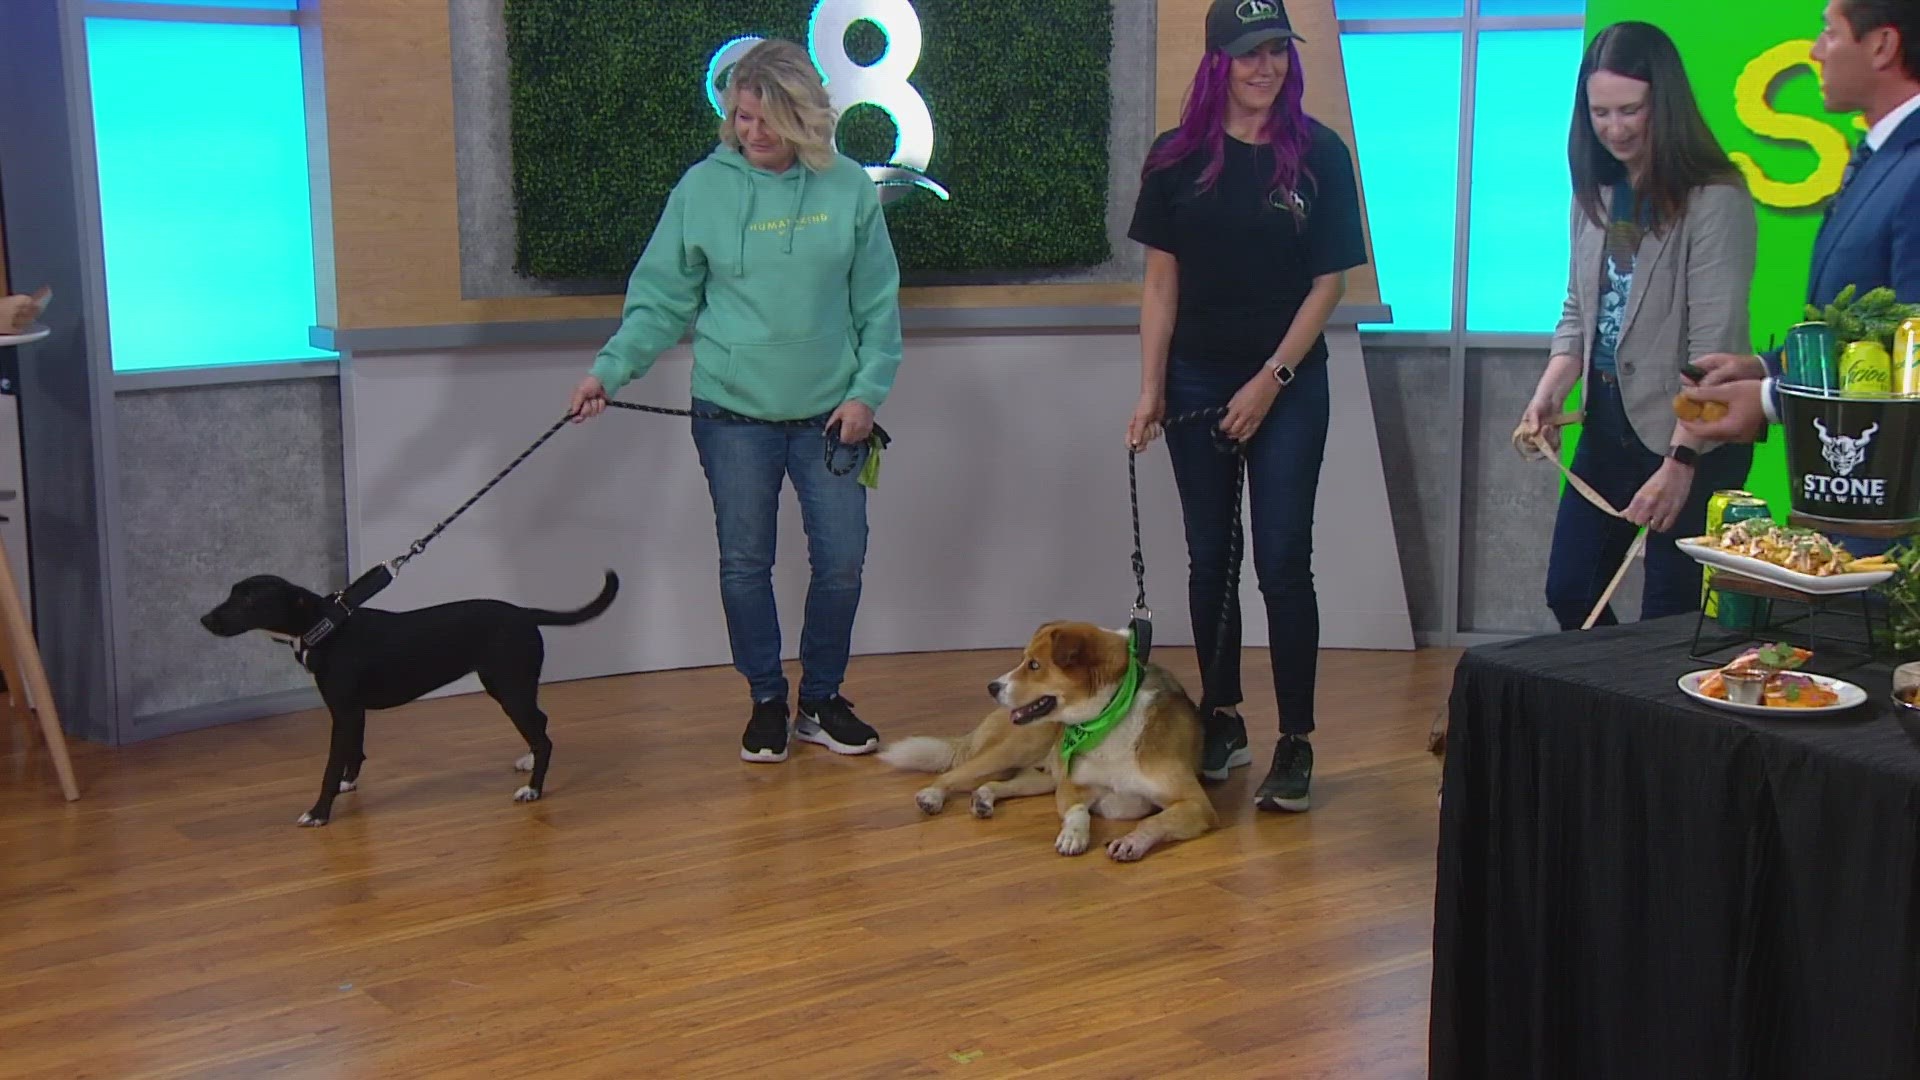 Lizzie Youngkin, Chef Israel, Marites Cotillon and Elise Hicks talked about St. Pawtrick’s Day, how people can participate and why Stone got involved with rescues.